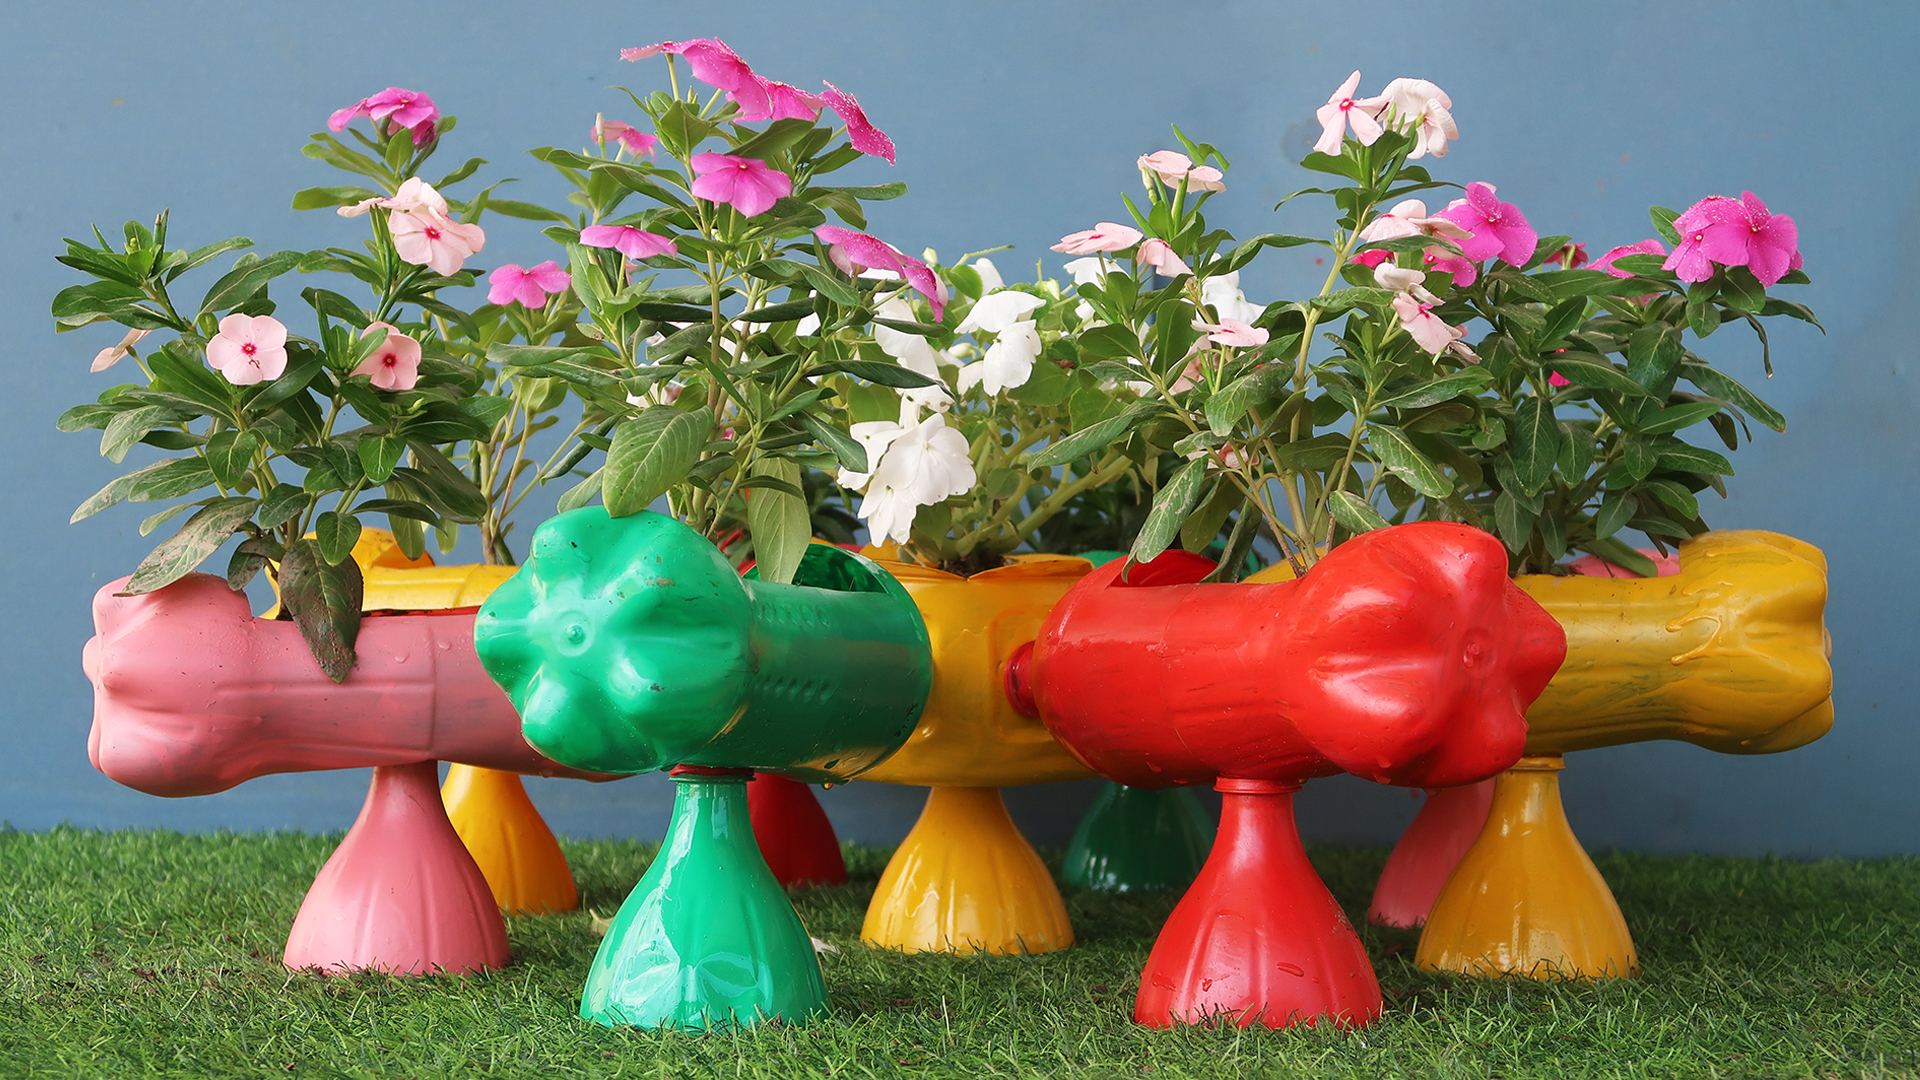 Unique And Innovative idea, Recycle Plastic Bottles Into A Beautiful, Colorful Flower Garden